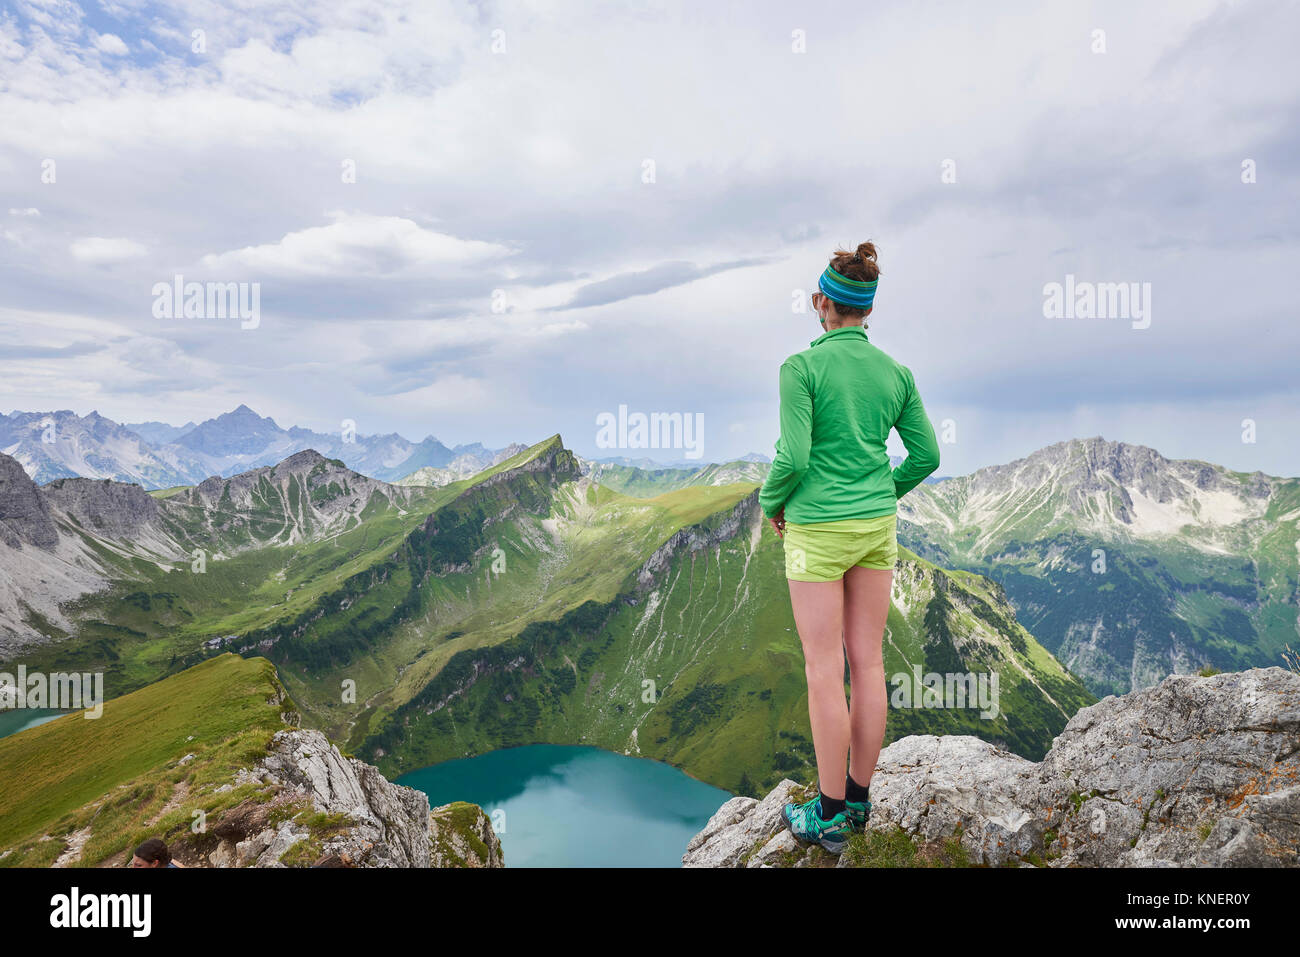 Rear view of female hiker on rocky edge looking out over Tannheim mountains, Tyrol, Austria Stock Photo